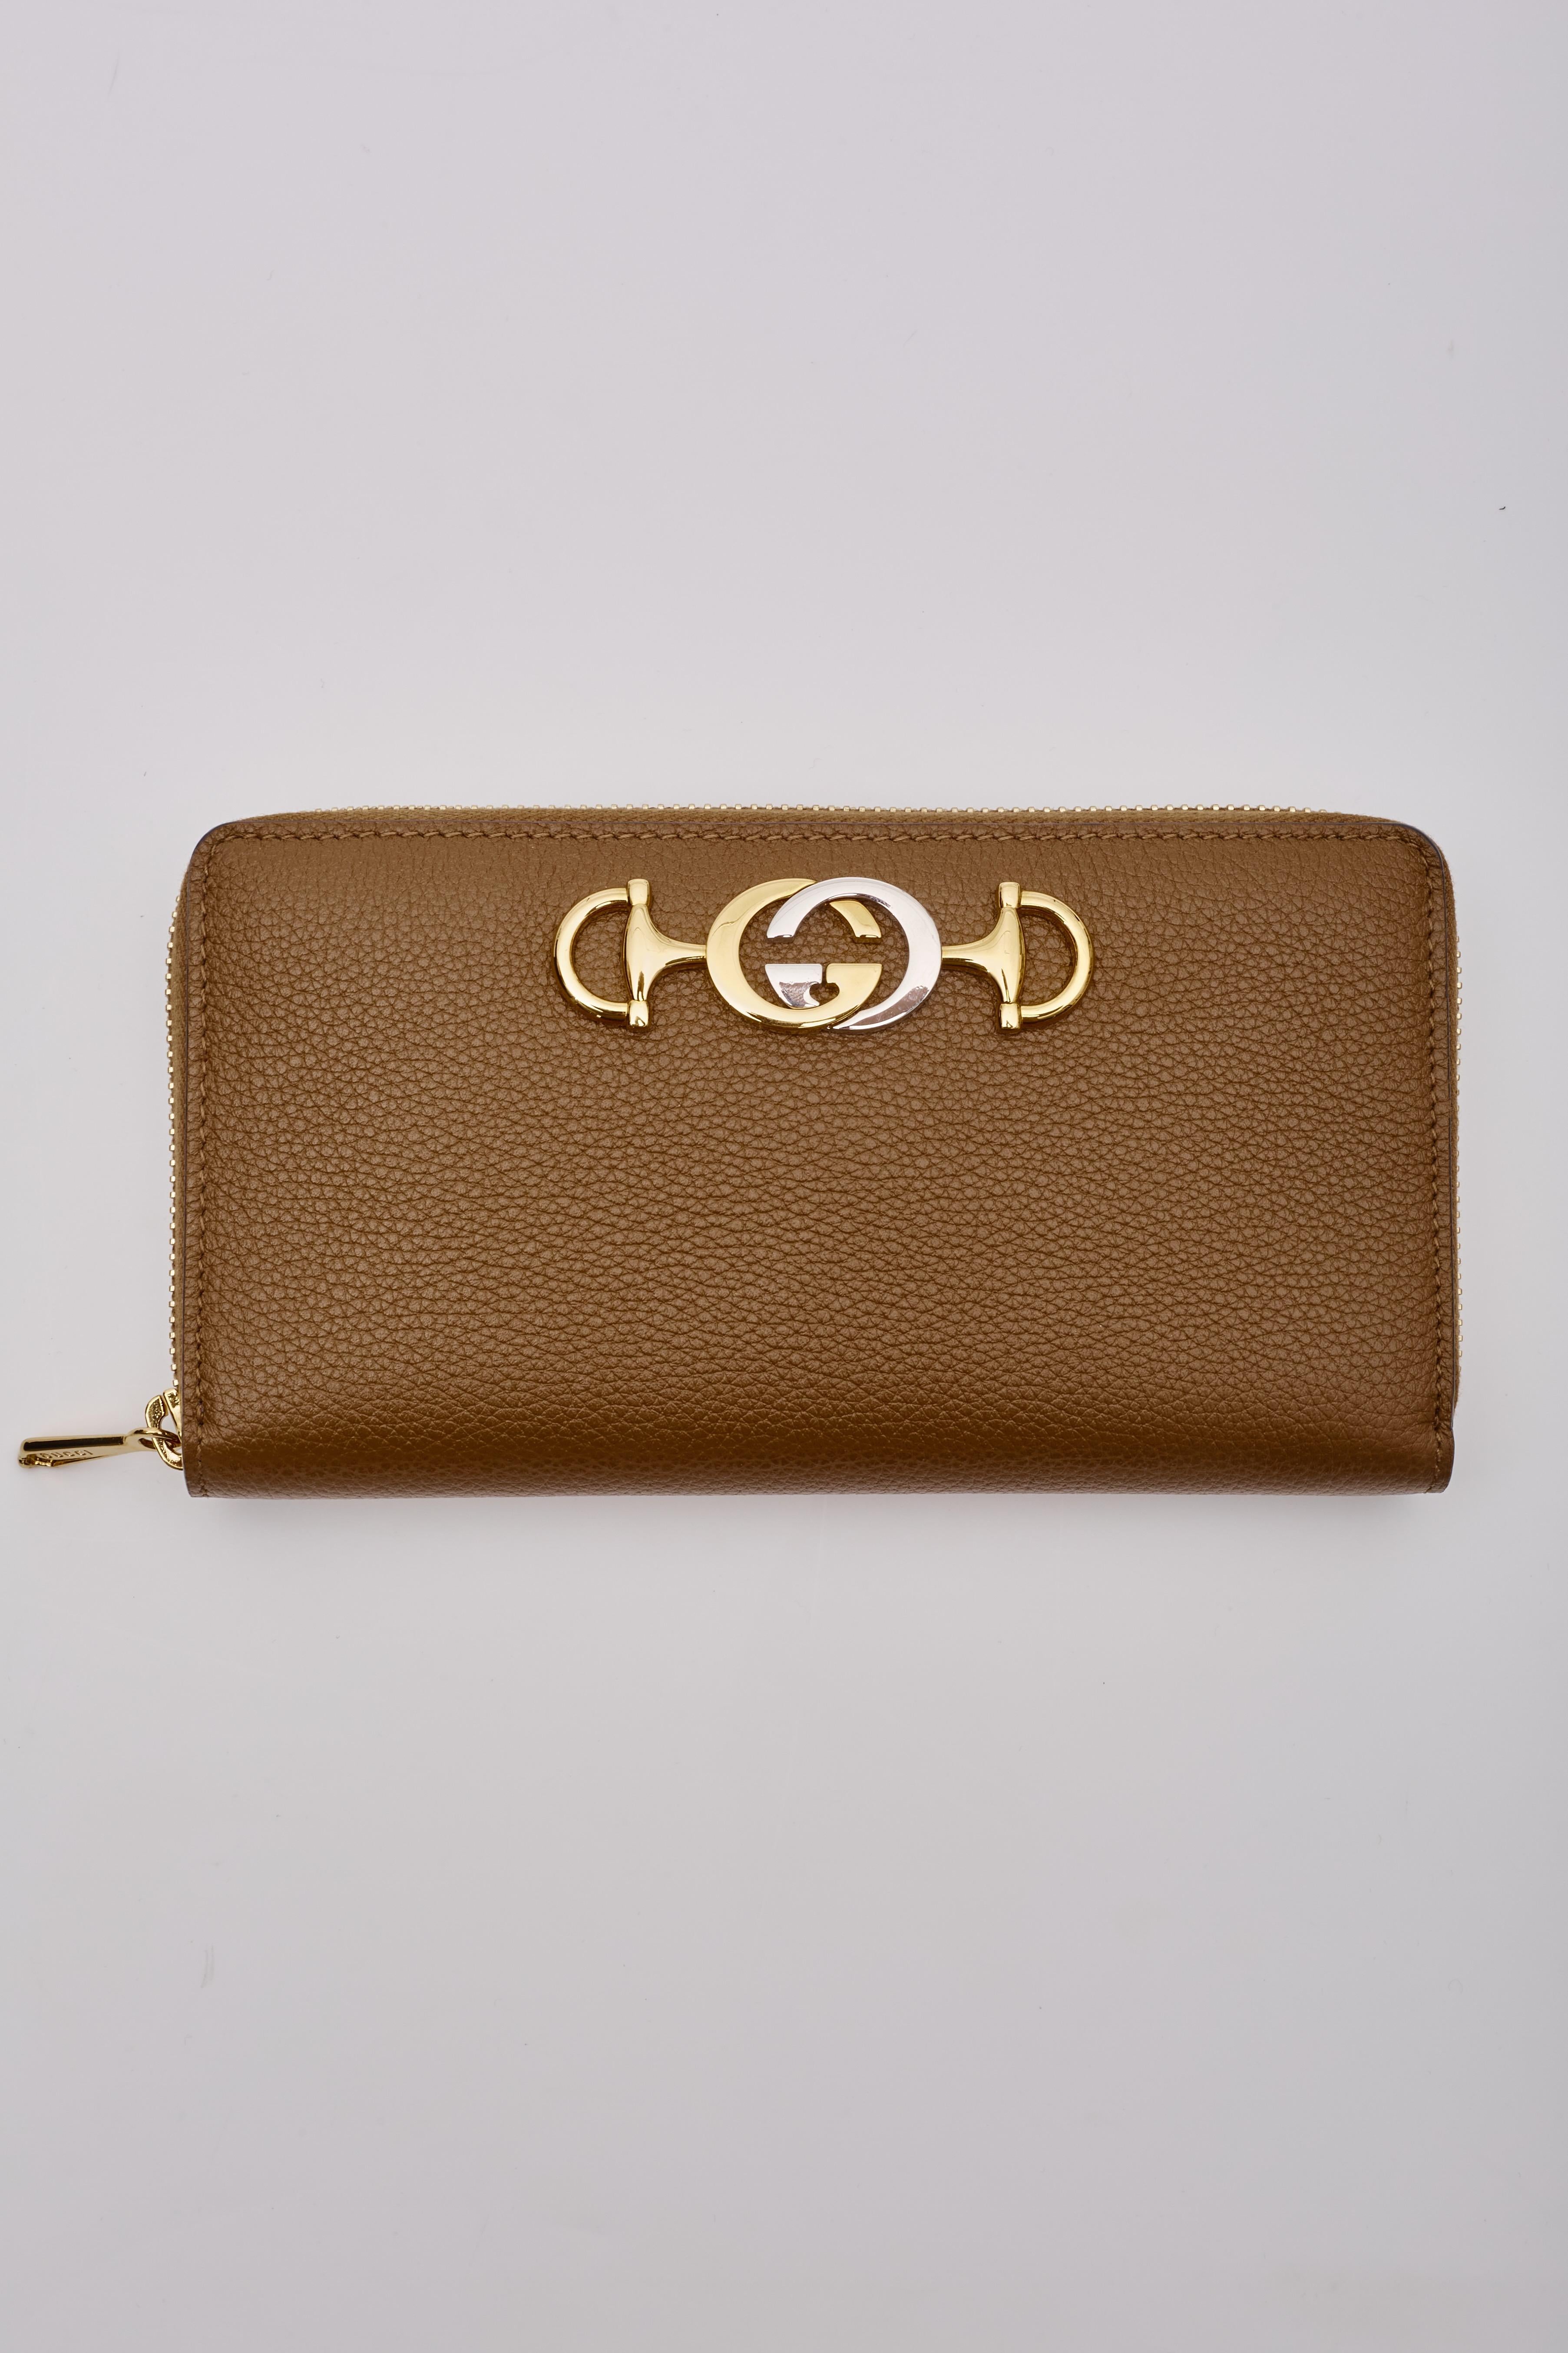 Gucci Caramel Leather Zumi Zip Around Wallet For Sale 6